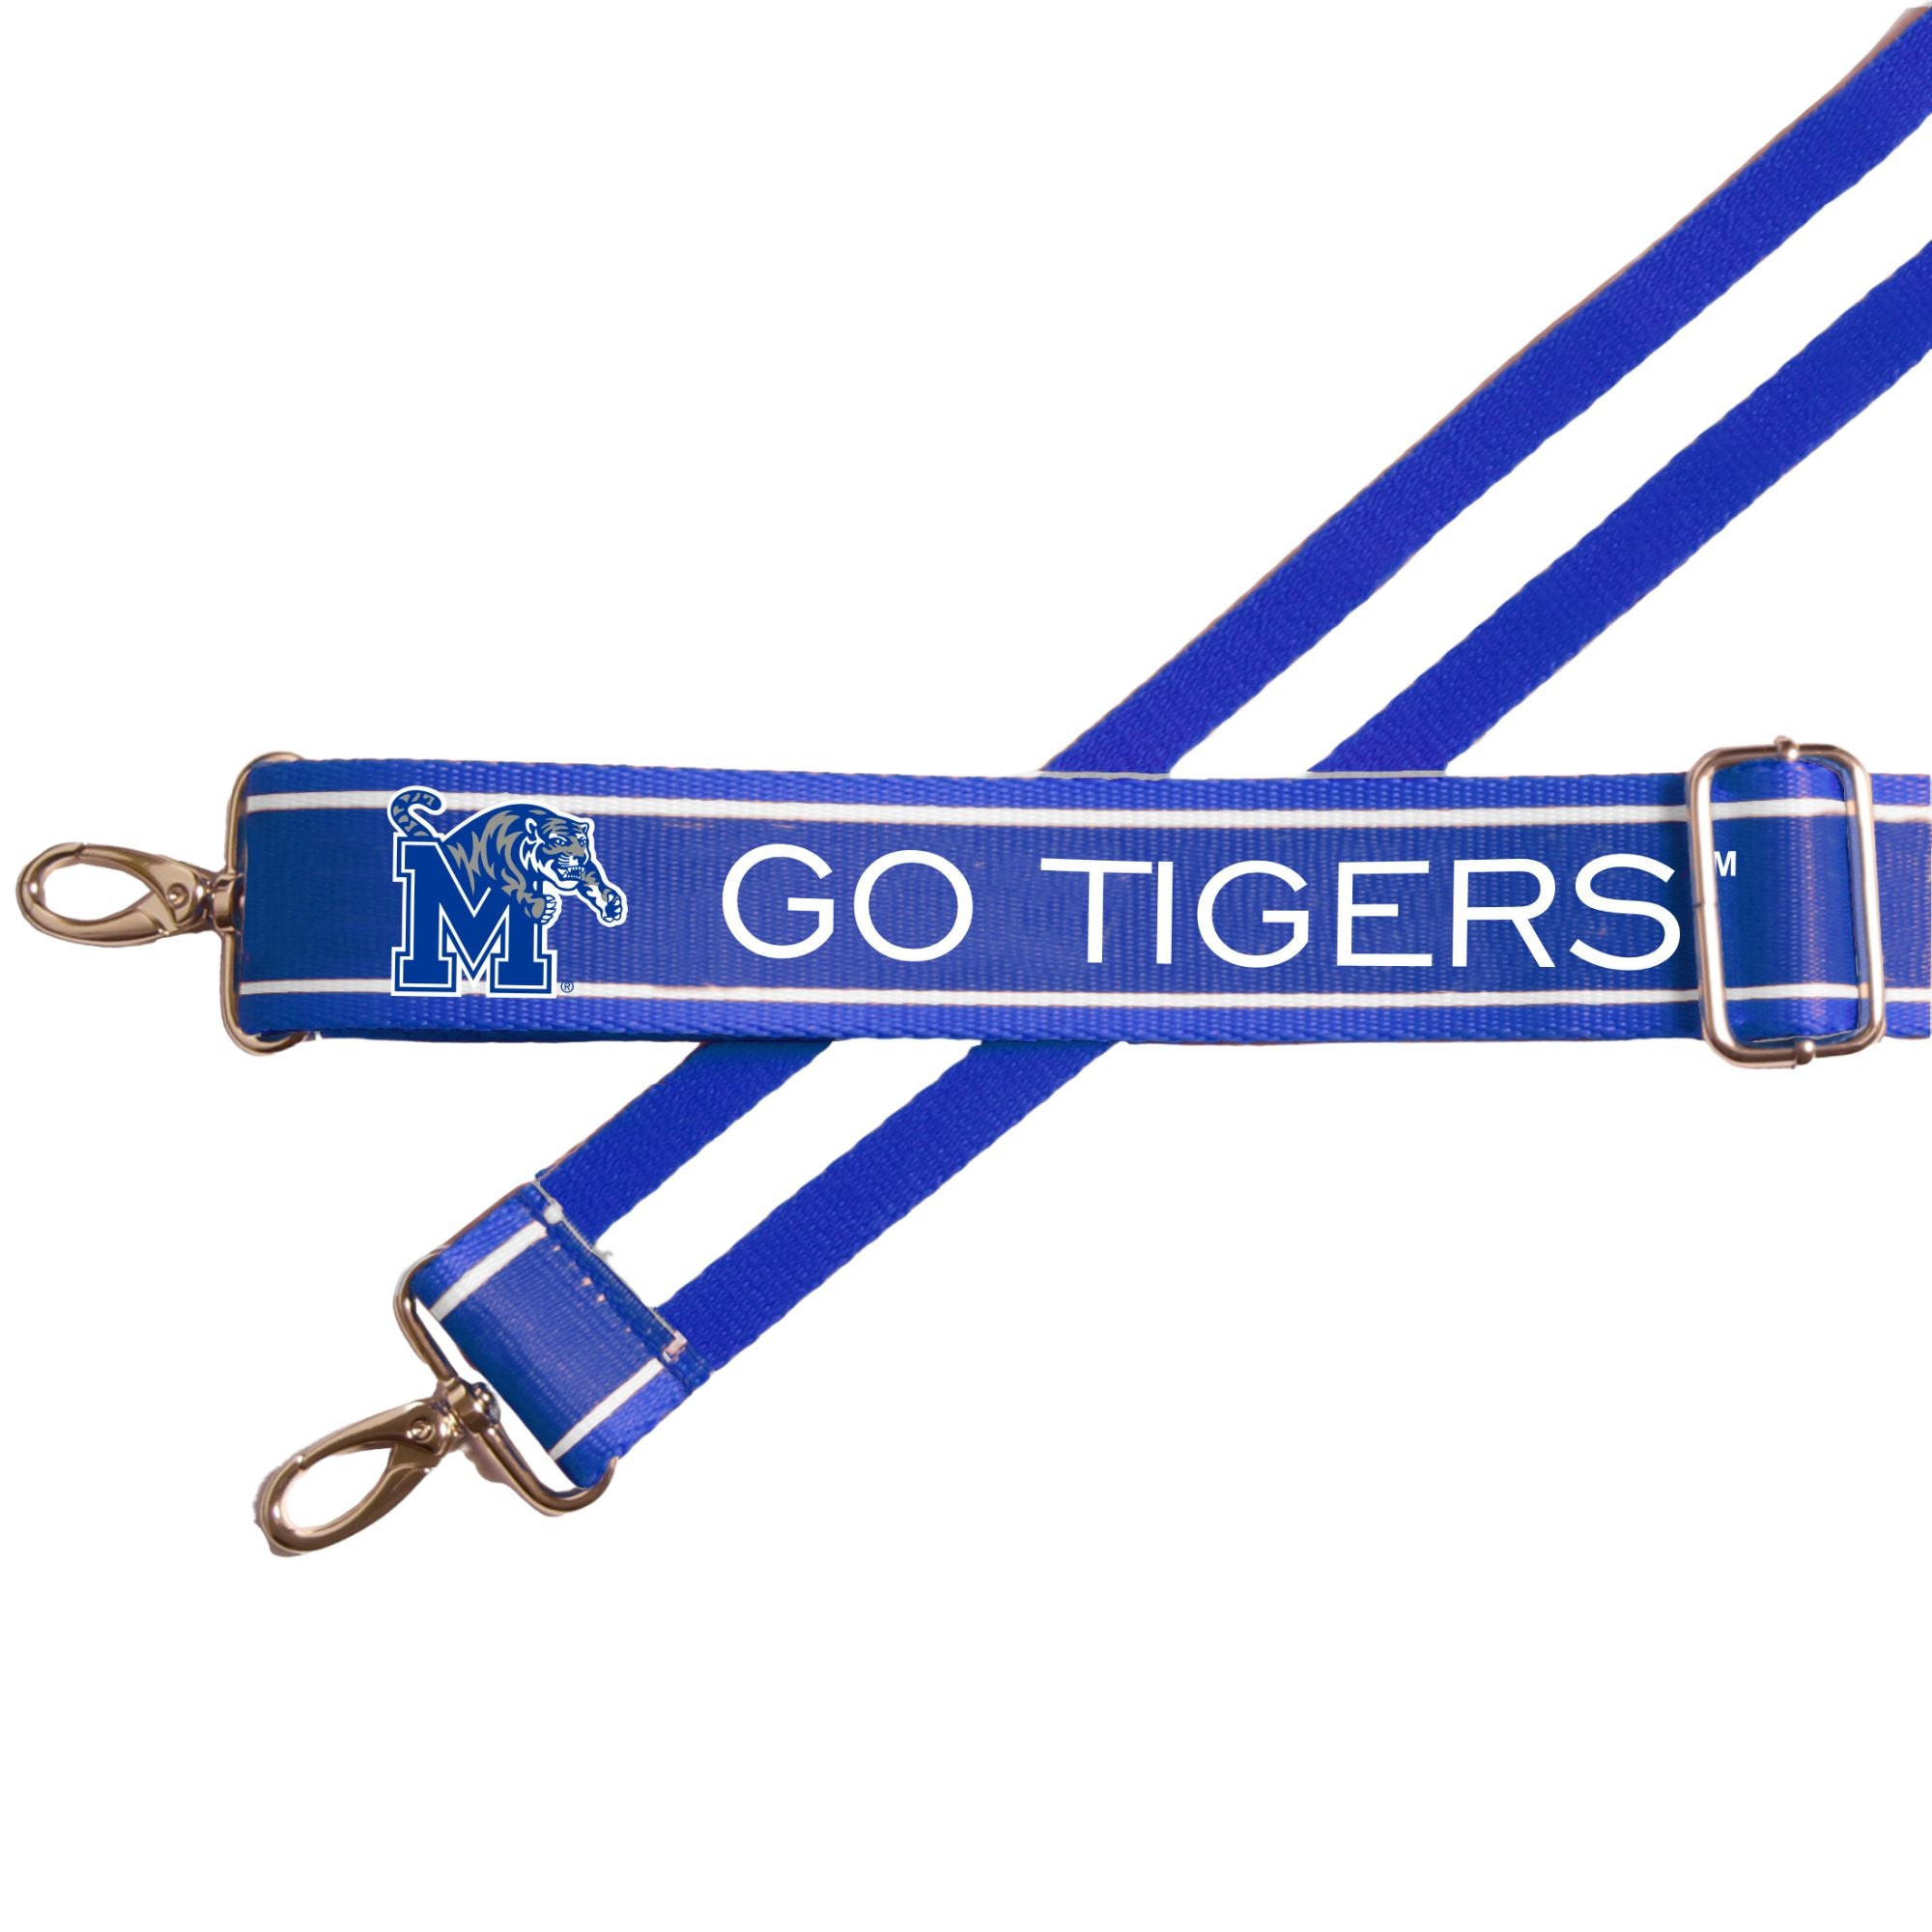 MEMPHIS 1.5" - Officially Licensed - Stripe